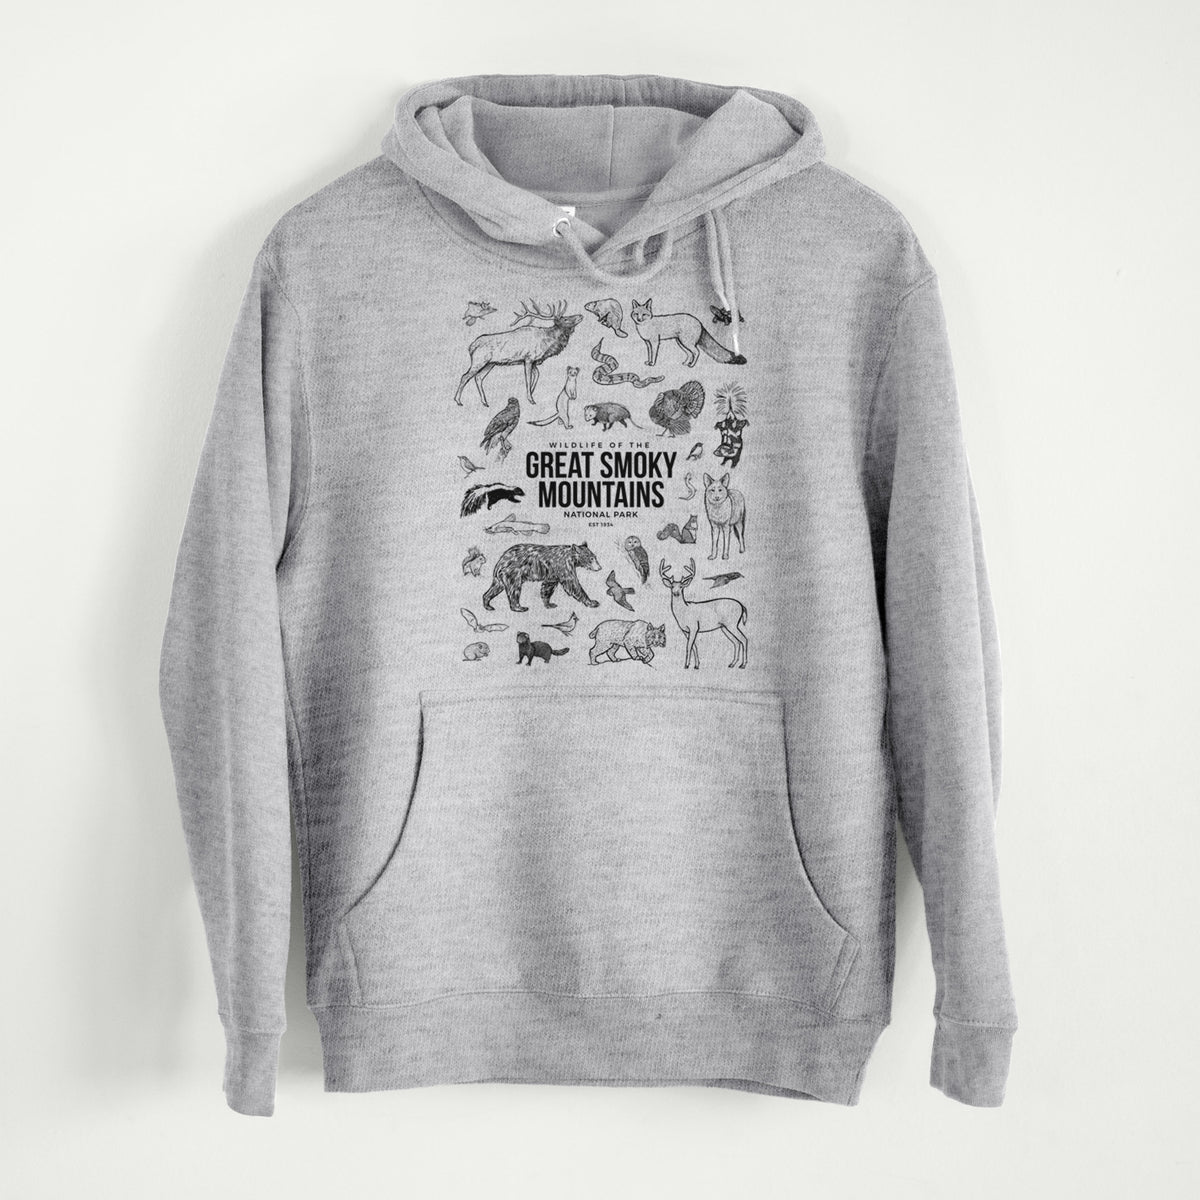 Wildlife of the Great Smoky Mountains National Park  - Mid-Weight Unisex Premium Blend Hoodie